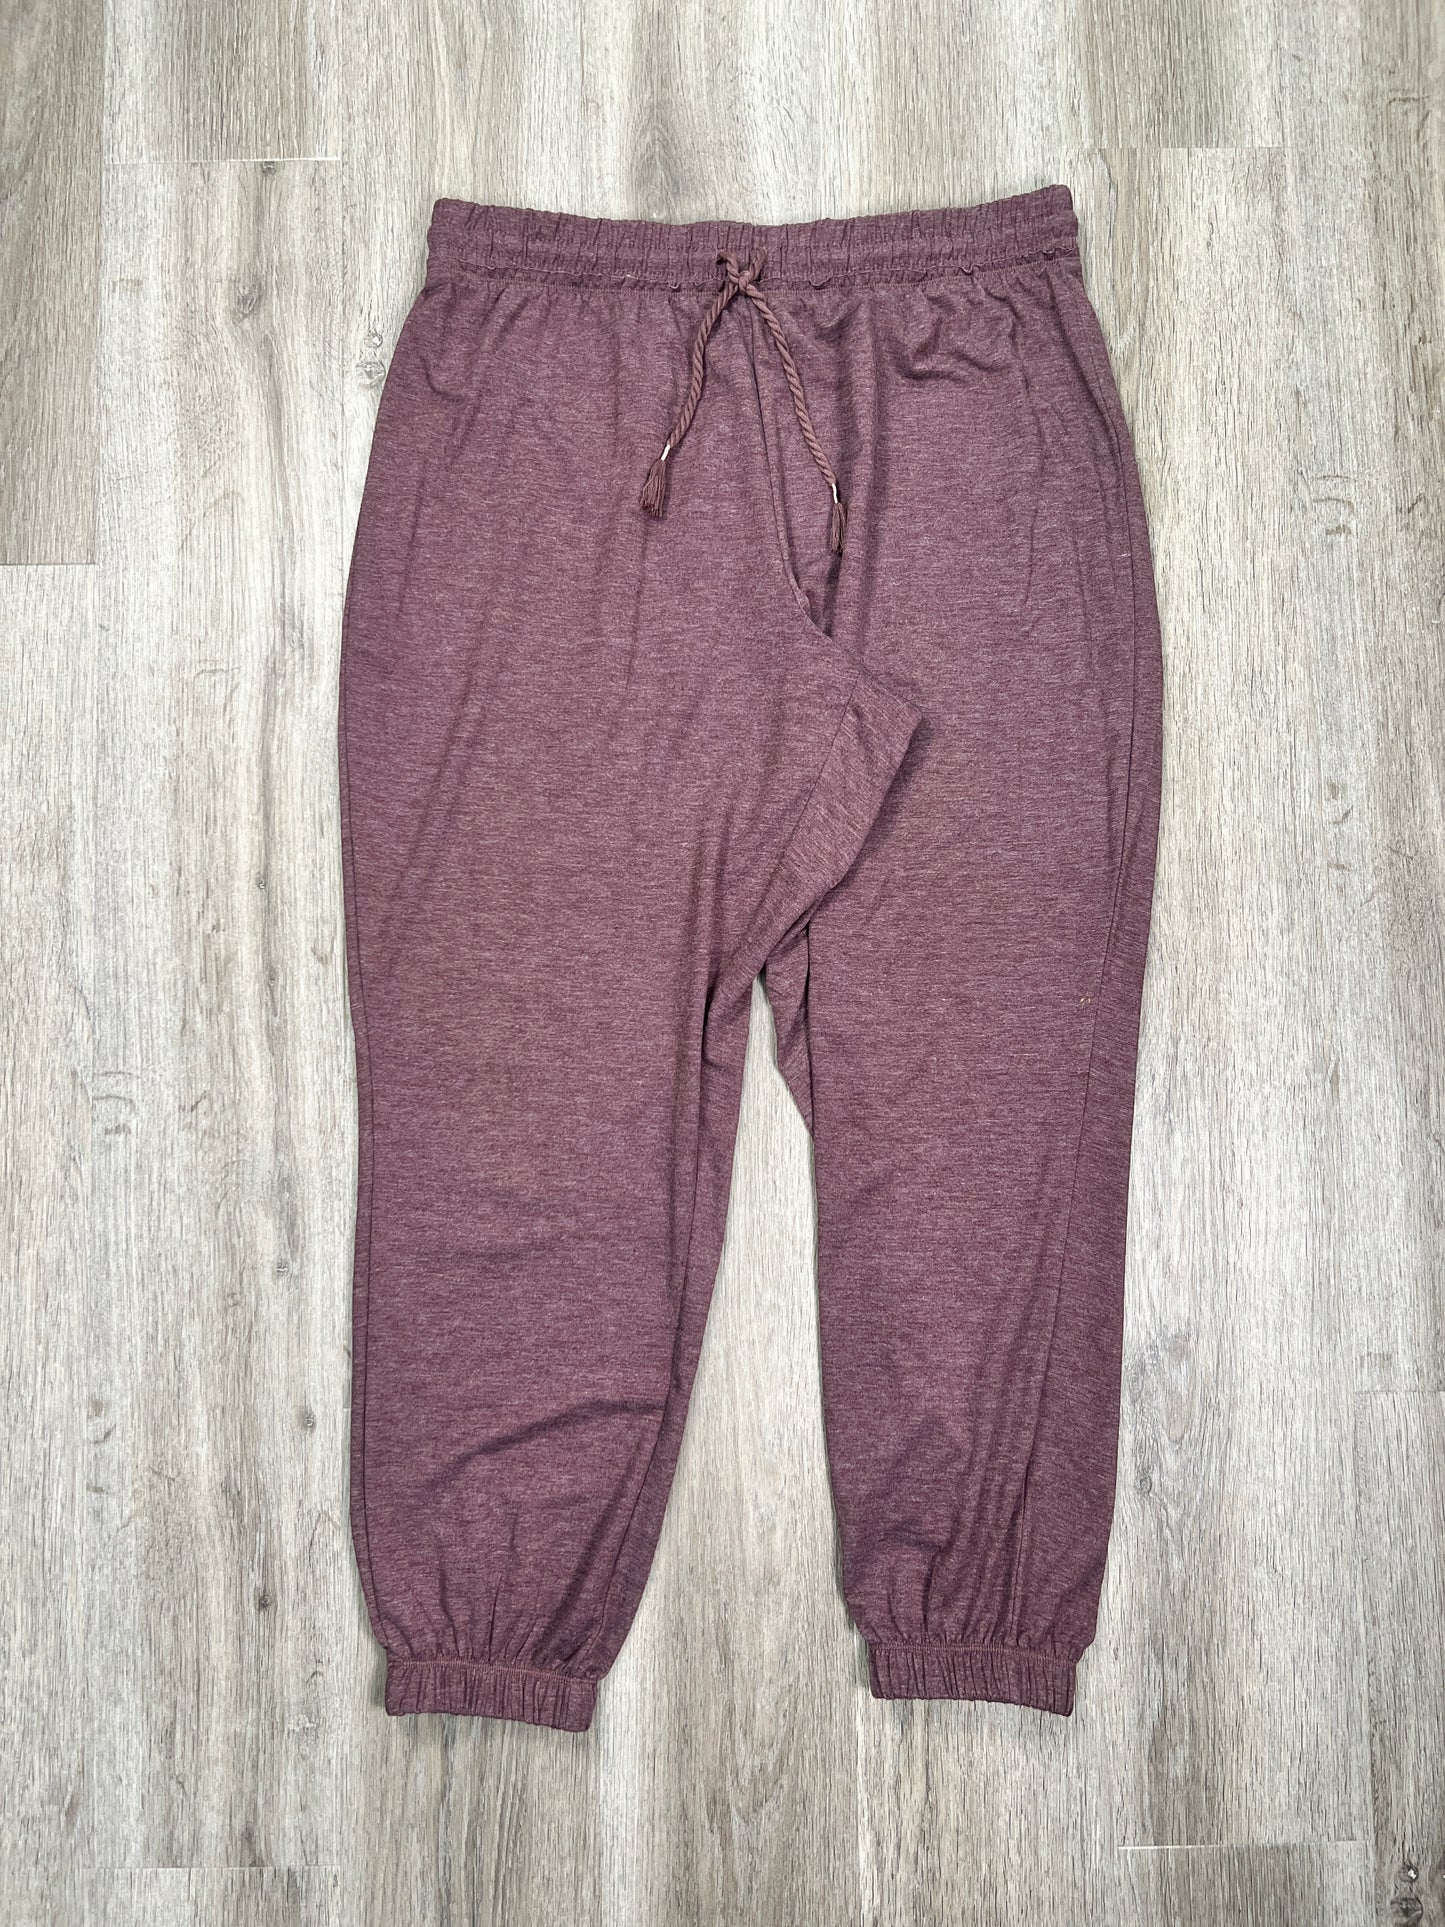 Lounge Set Pants By LIVE WELL  Size: 1x